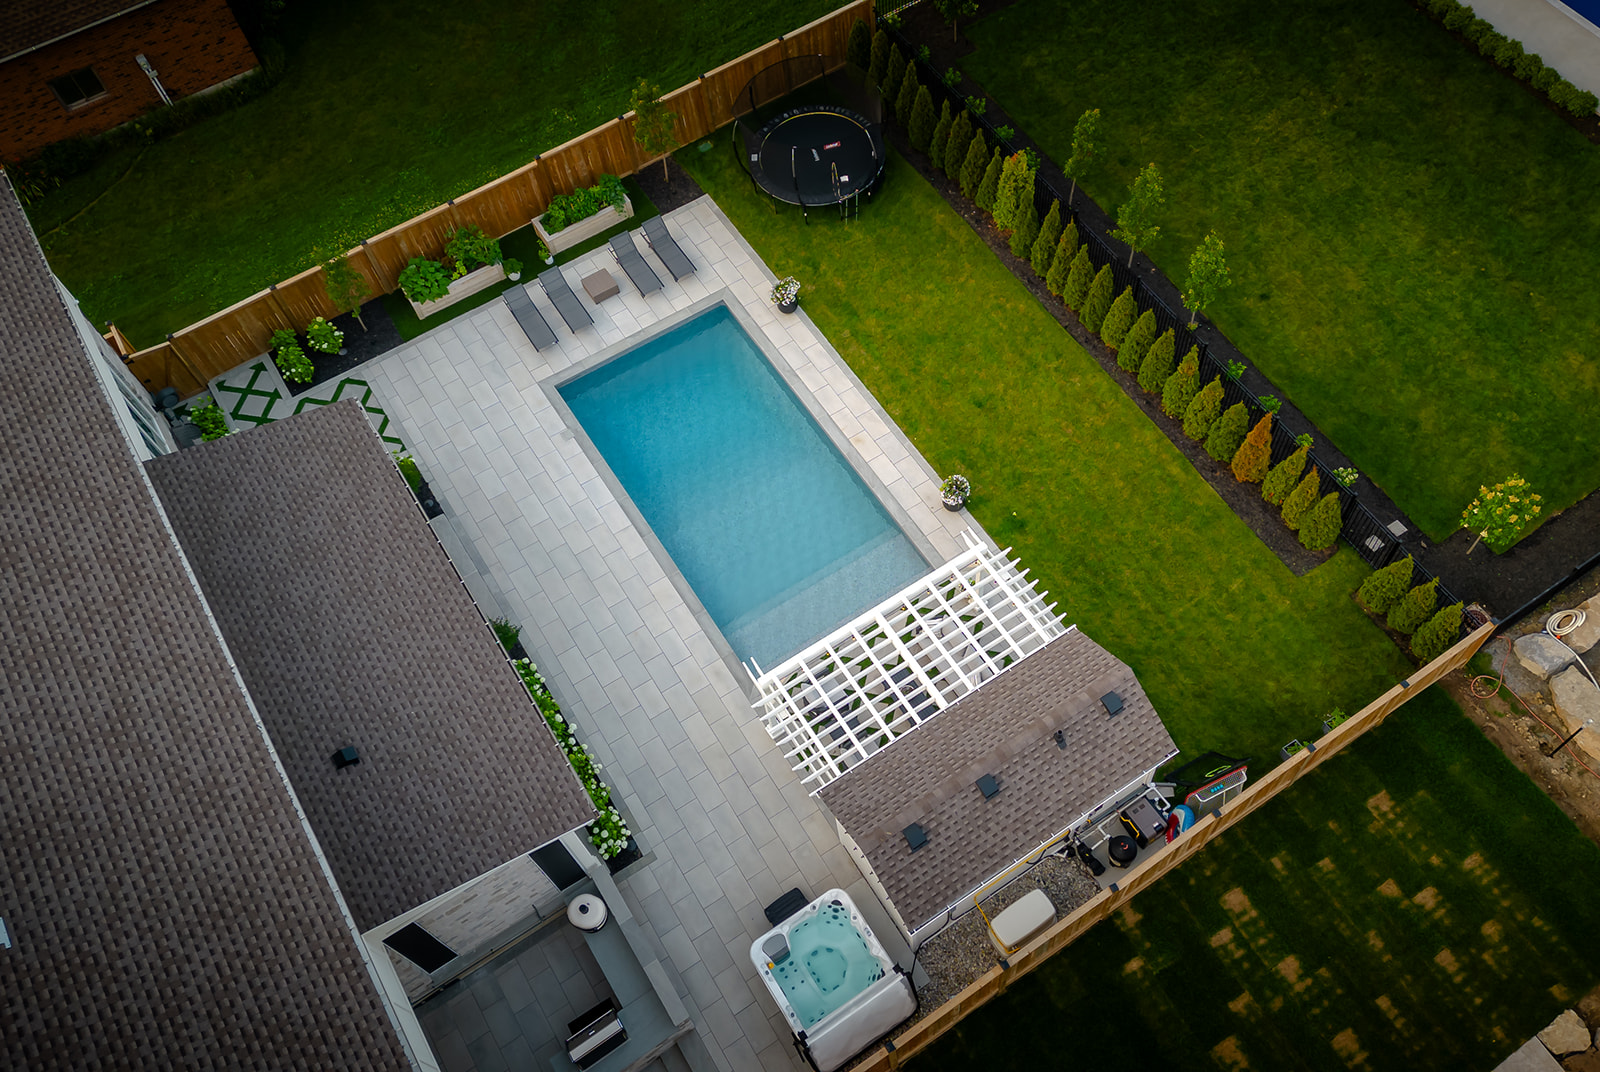 Inground pool with lawn chairs on top of patio stones and a garden along the fence.